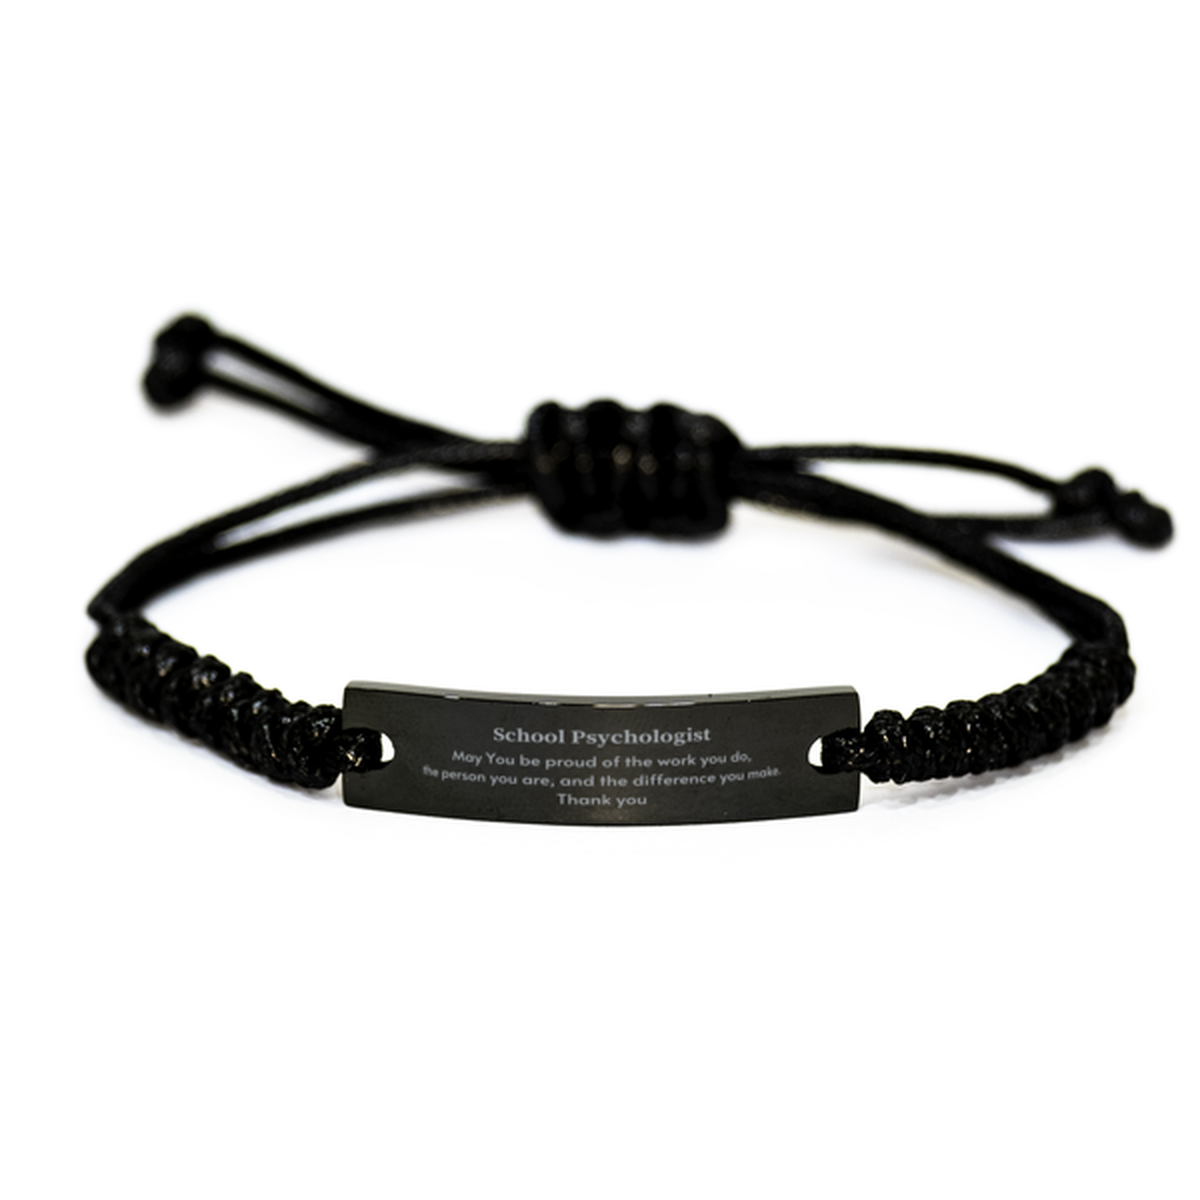 Heartwarming Black Rope Bracelet Retirement Coworkers Gifts for School Psychologist, School Psychologist May You be proud of the work you do, the person you are Gifts for Boss Men Women Friends